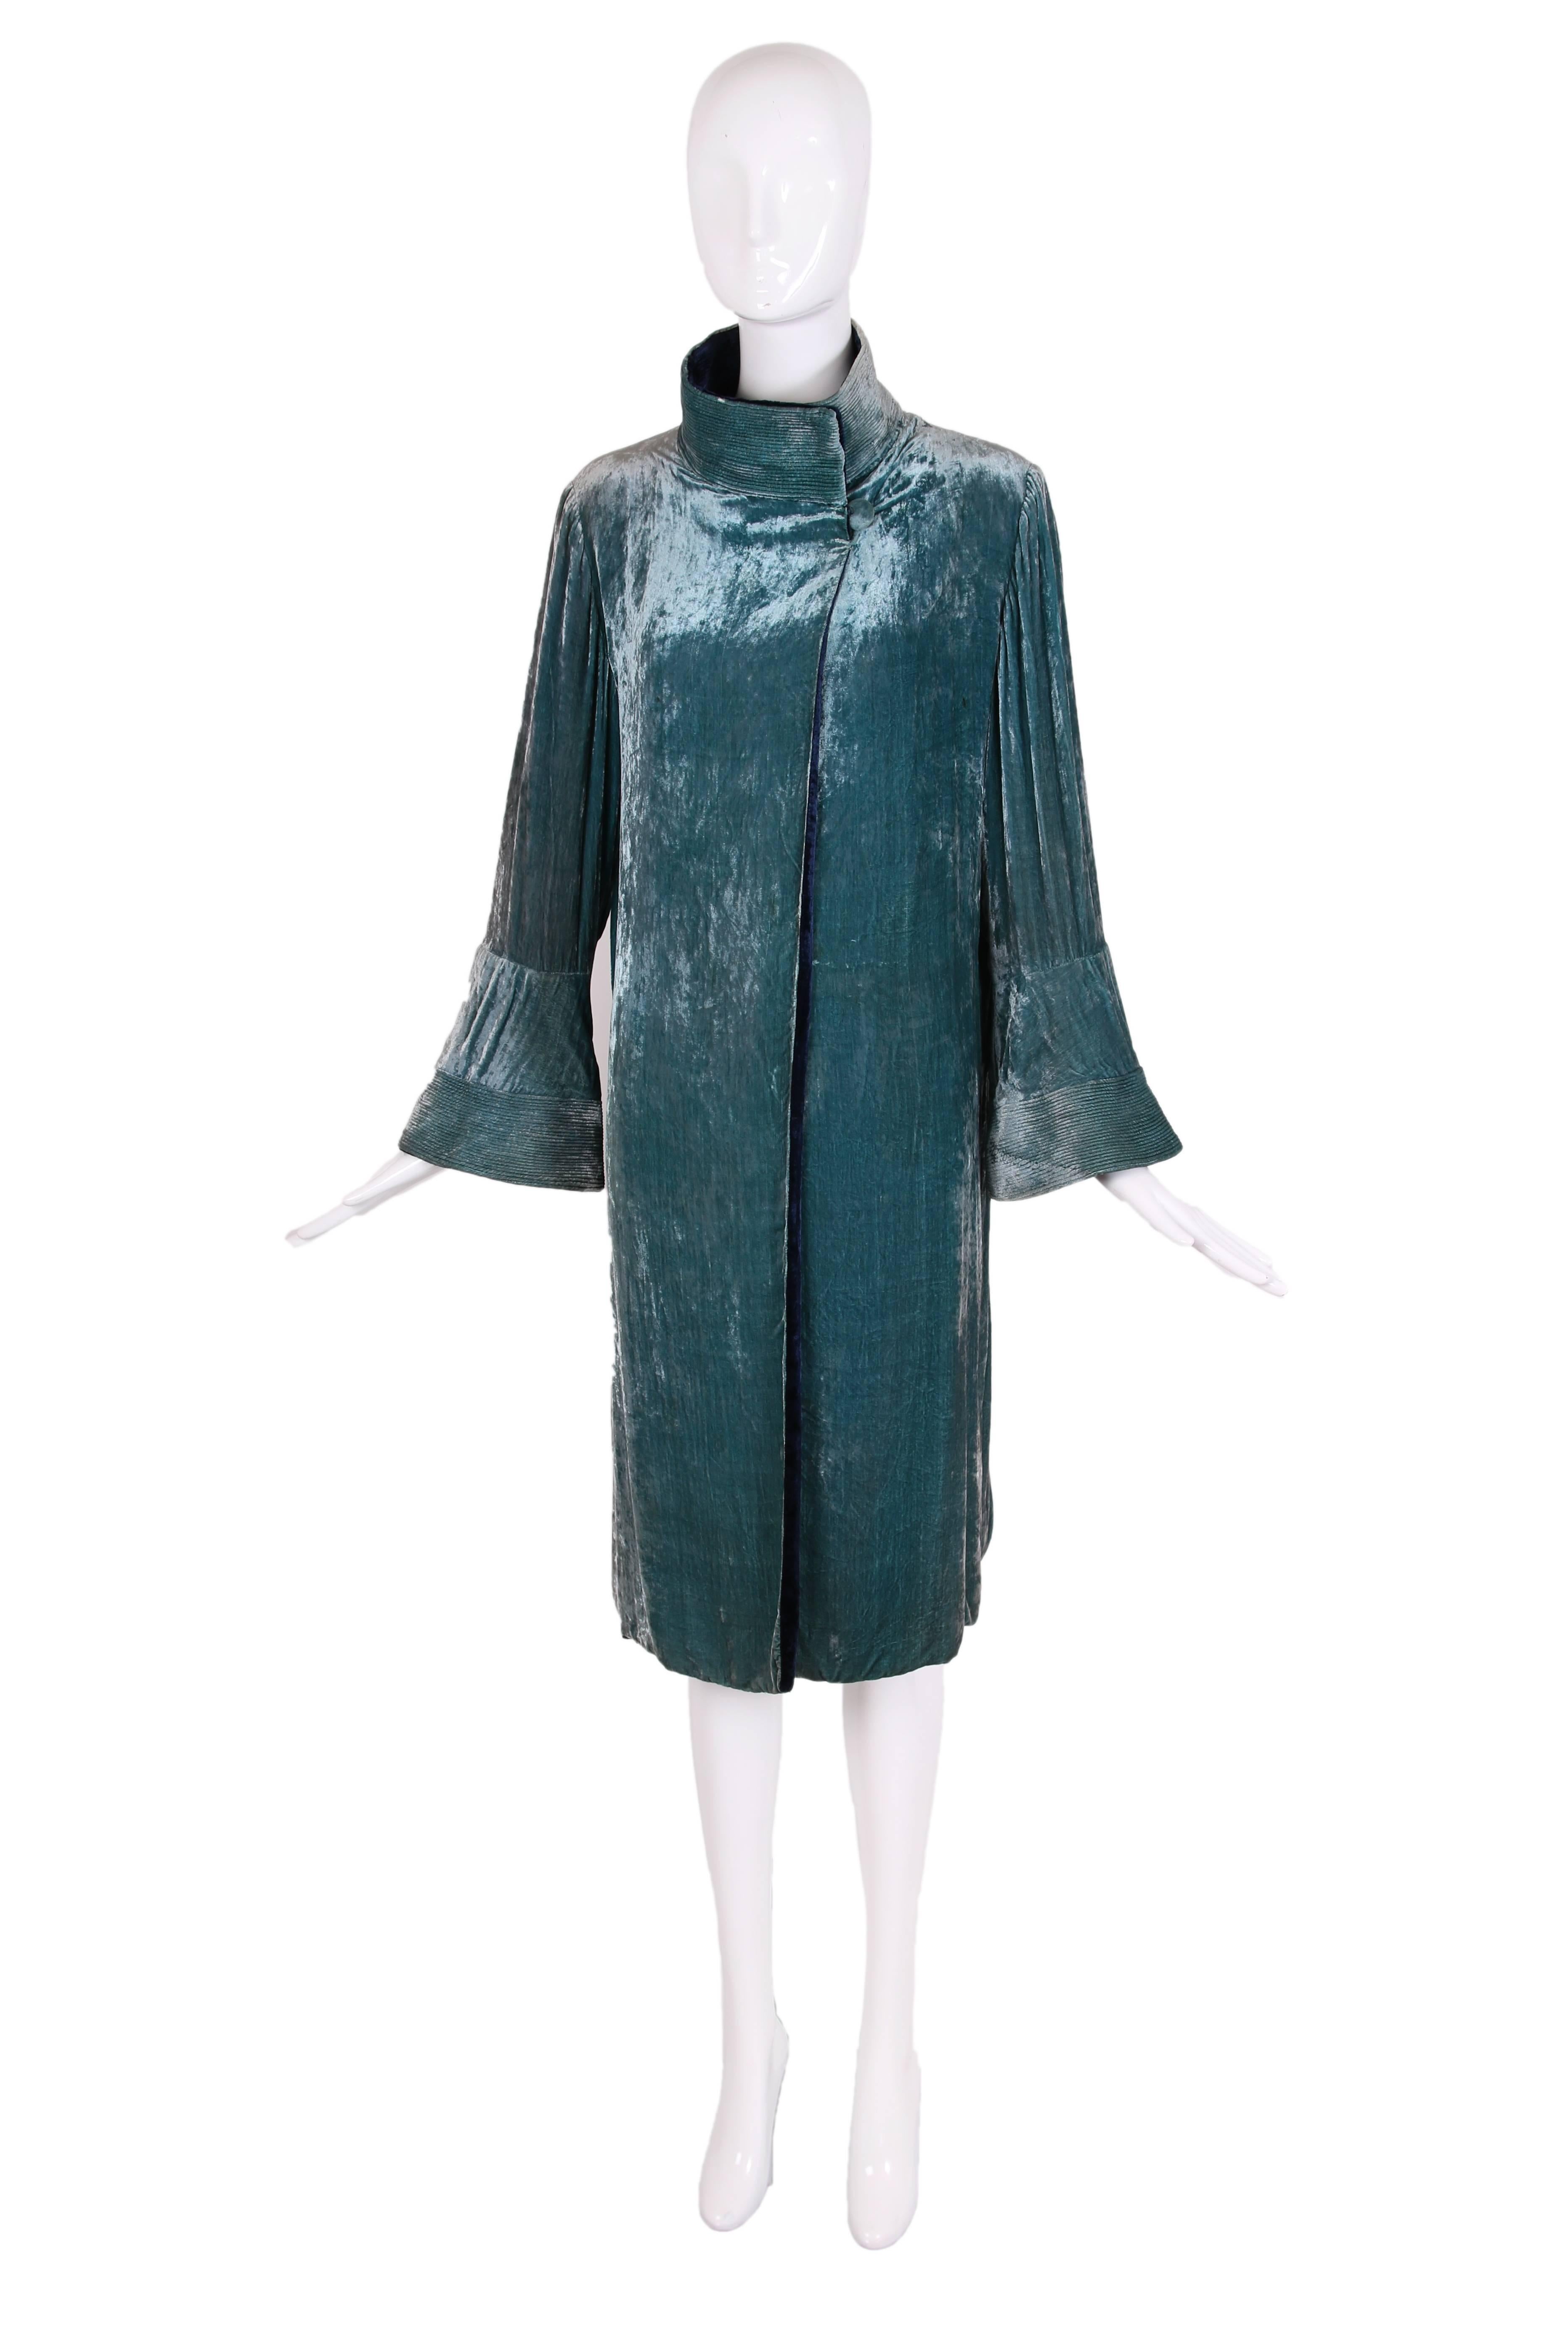 Circa 1925 attributed to Jeanne Lanvin silk velvet reversible coat in peacock blue on one side and midnight blue on the other. There are small gathers where the sleeves meet the armholes, quilted and overstitched design elements at the cuffs and